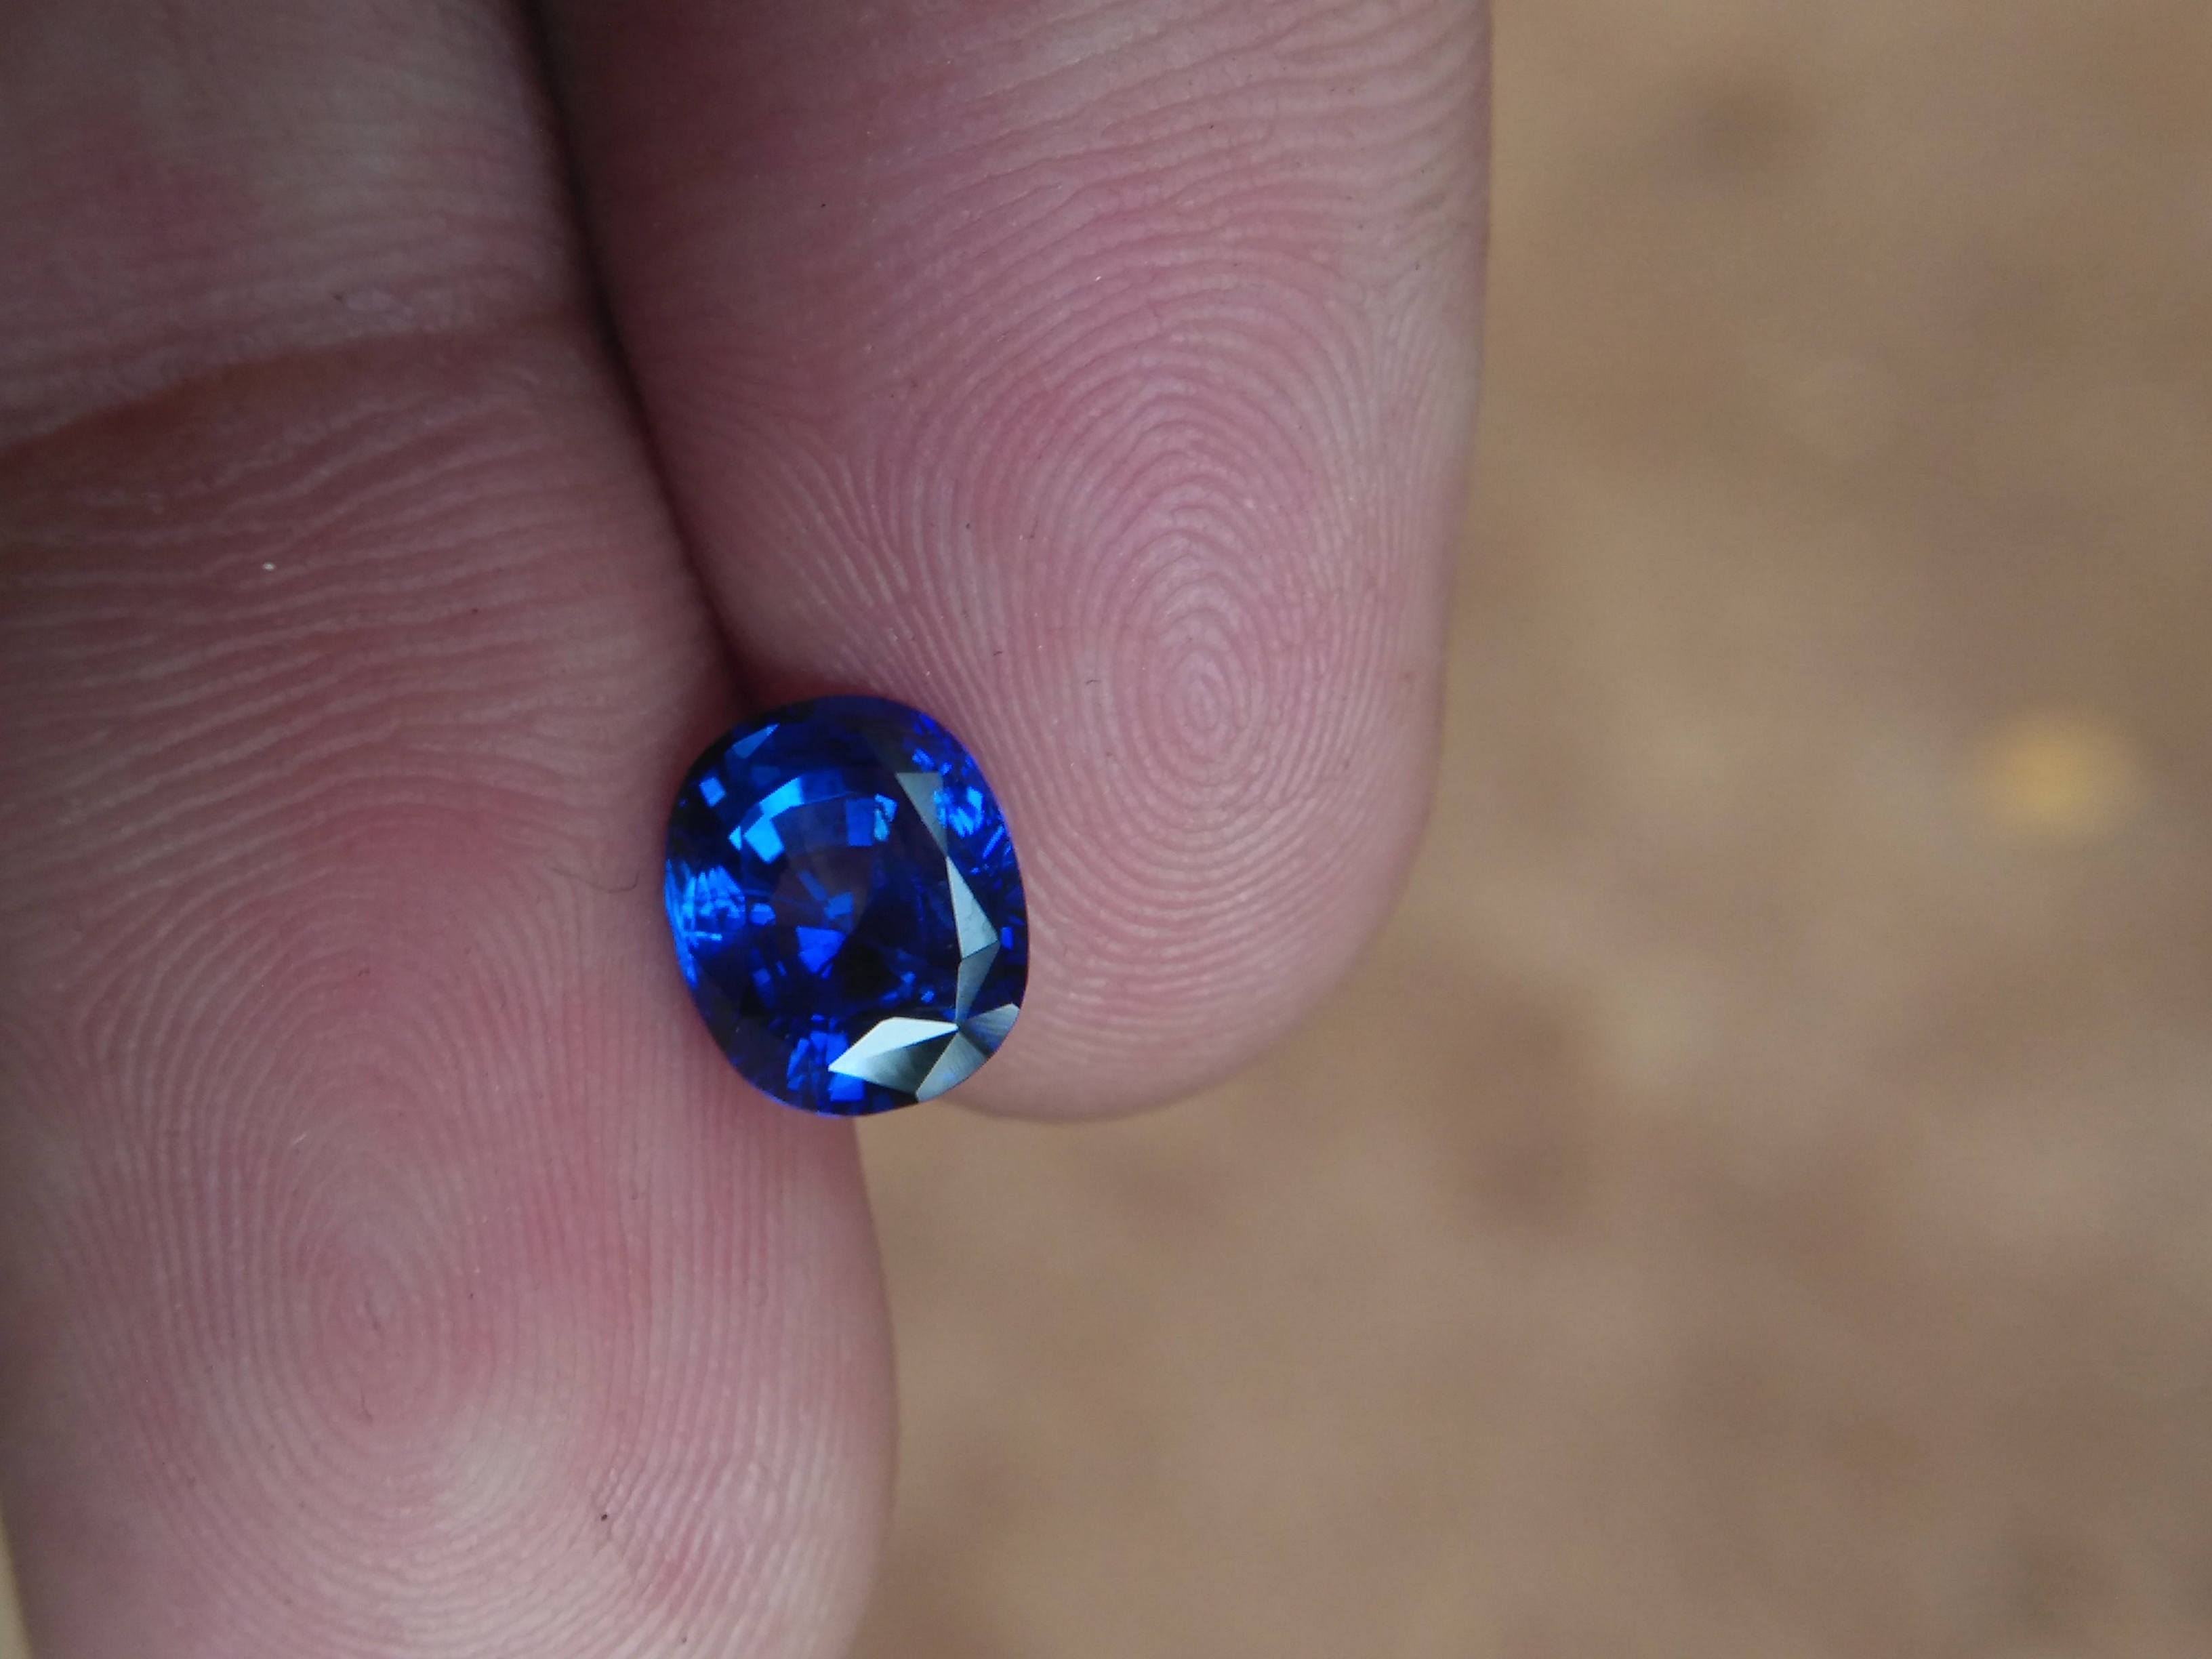 Ceylon Natural Blue Sapphire Unearthed from city of gem Ratnapura Sri Lanka. According to Vedic Astrology Blue Sapphire represents the planet of saturn. It is said that if blue sapphire gemstone gives good effects to wearer can achieve huge success in life.